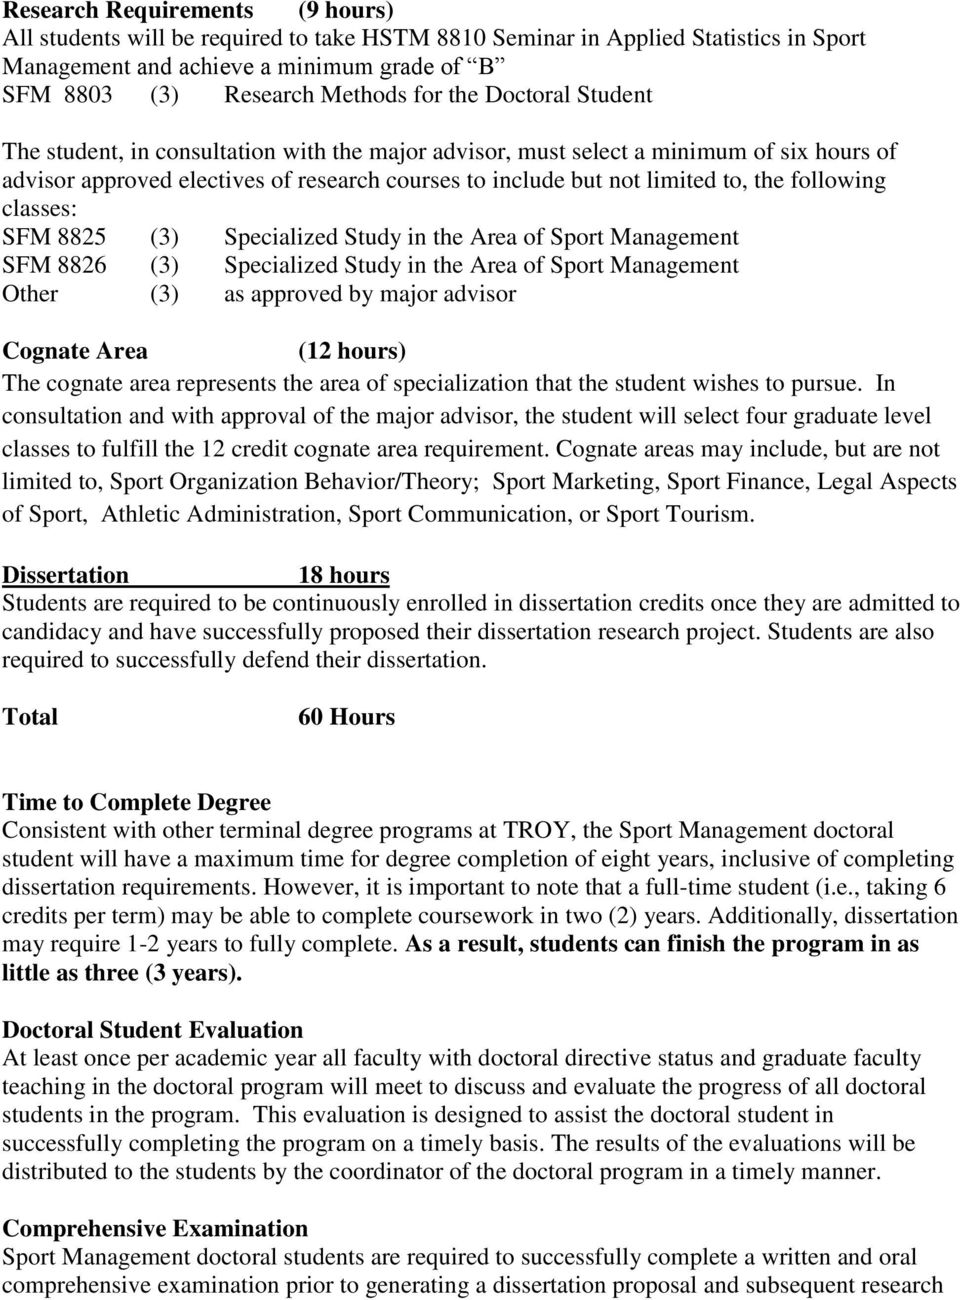 following classes: SFM 8825 (3) Specialized Study in the Area of Sport Management SFM 8826 (3) Specialized Study in the Area of Sport Management Other (3) as approved by major advisor Cognate Area